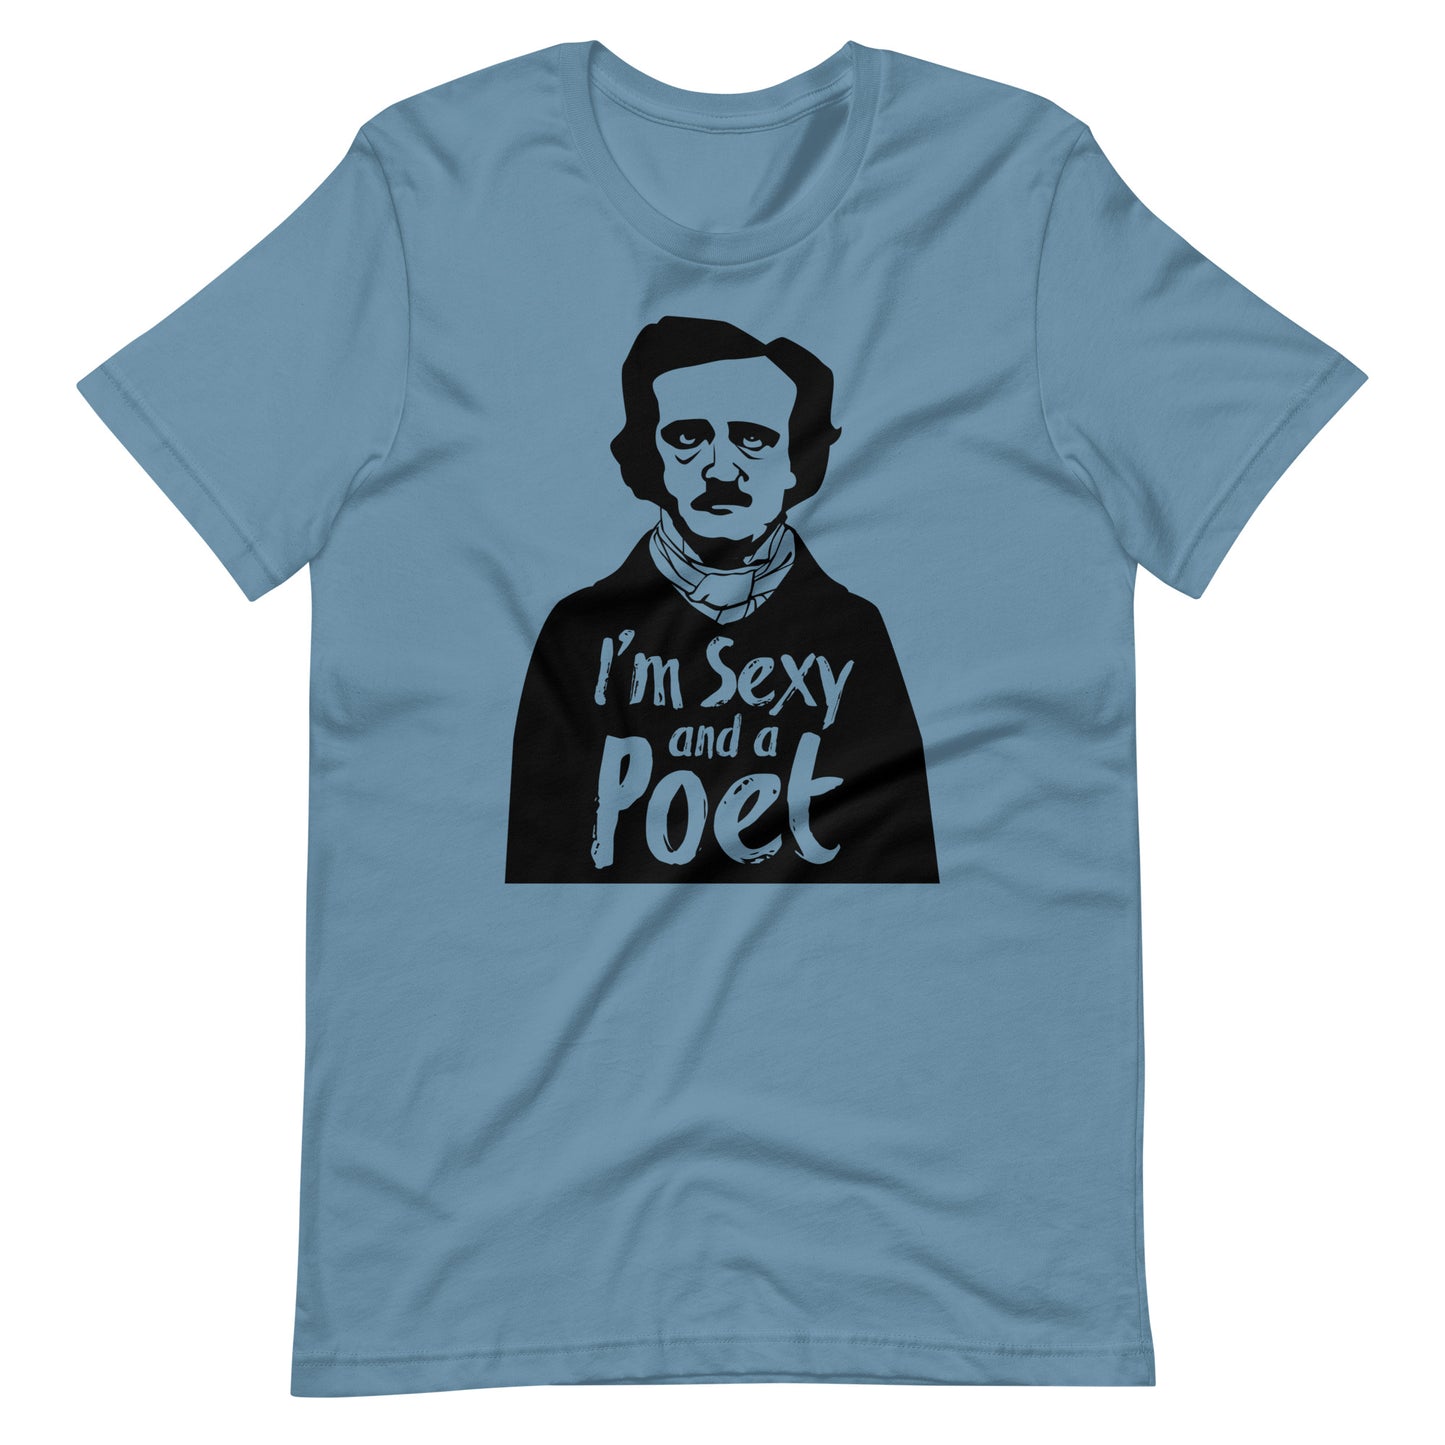 Women's Edgar Allan Poe "I'm Sexy and a Poet" t-shirt - Steel Blue Front